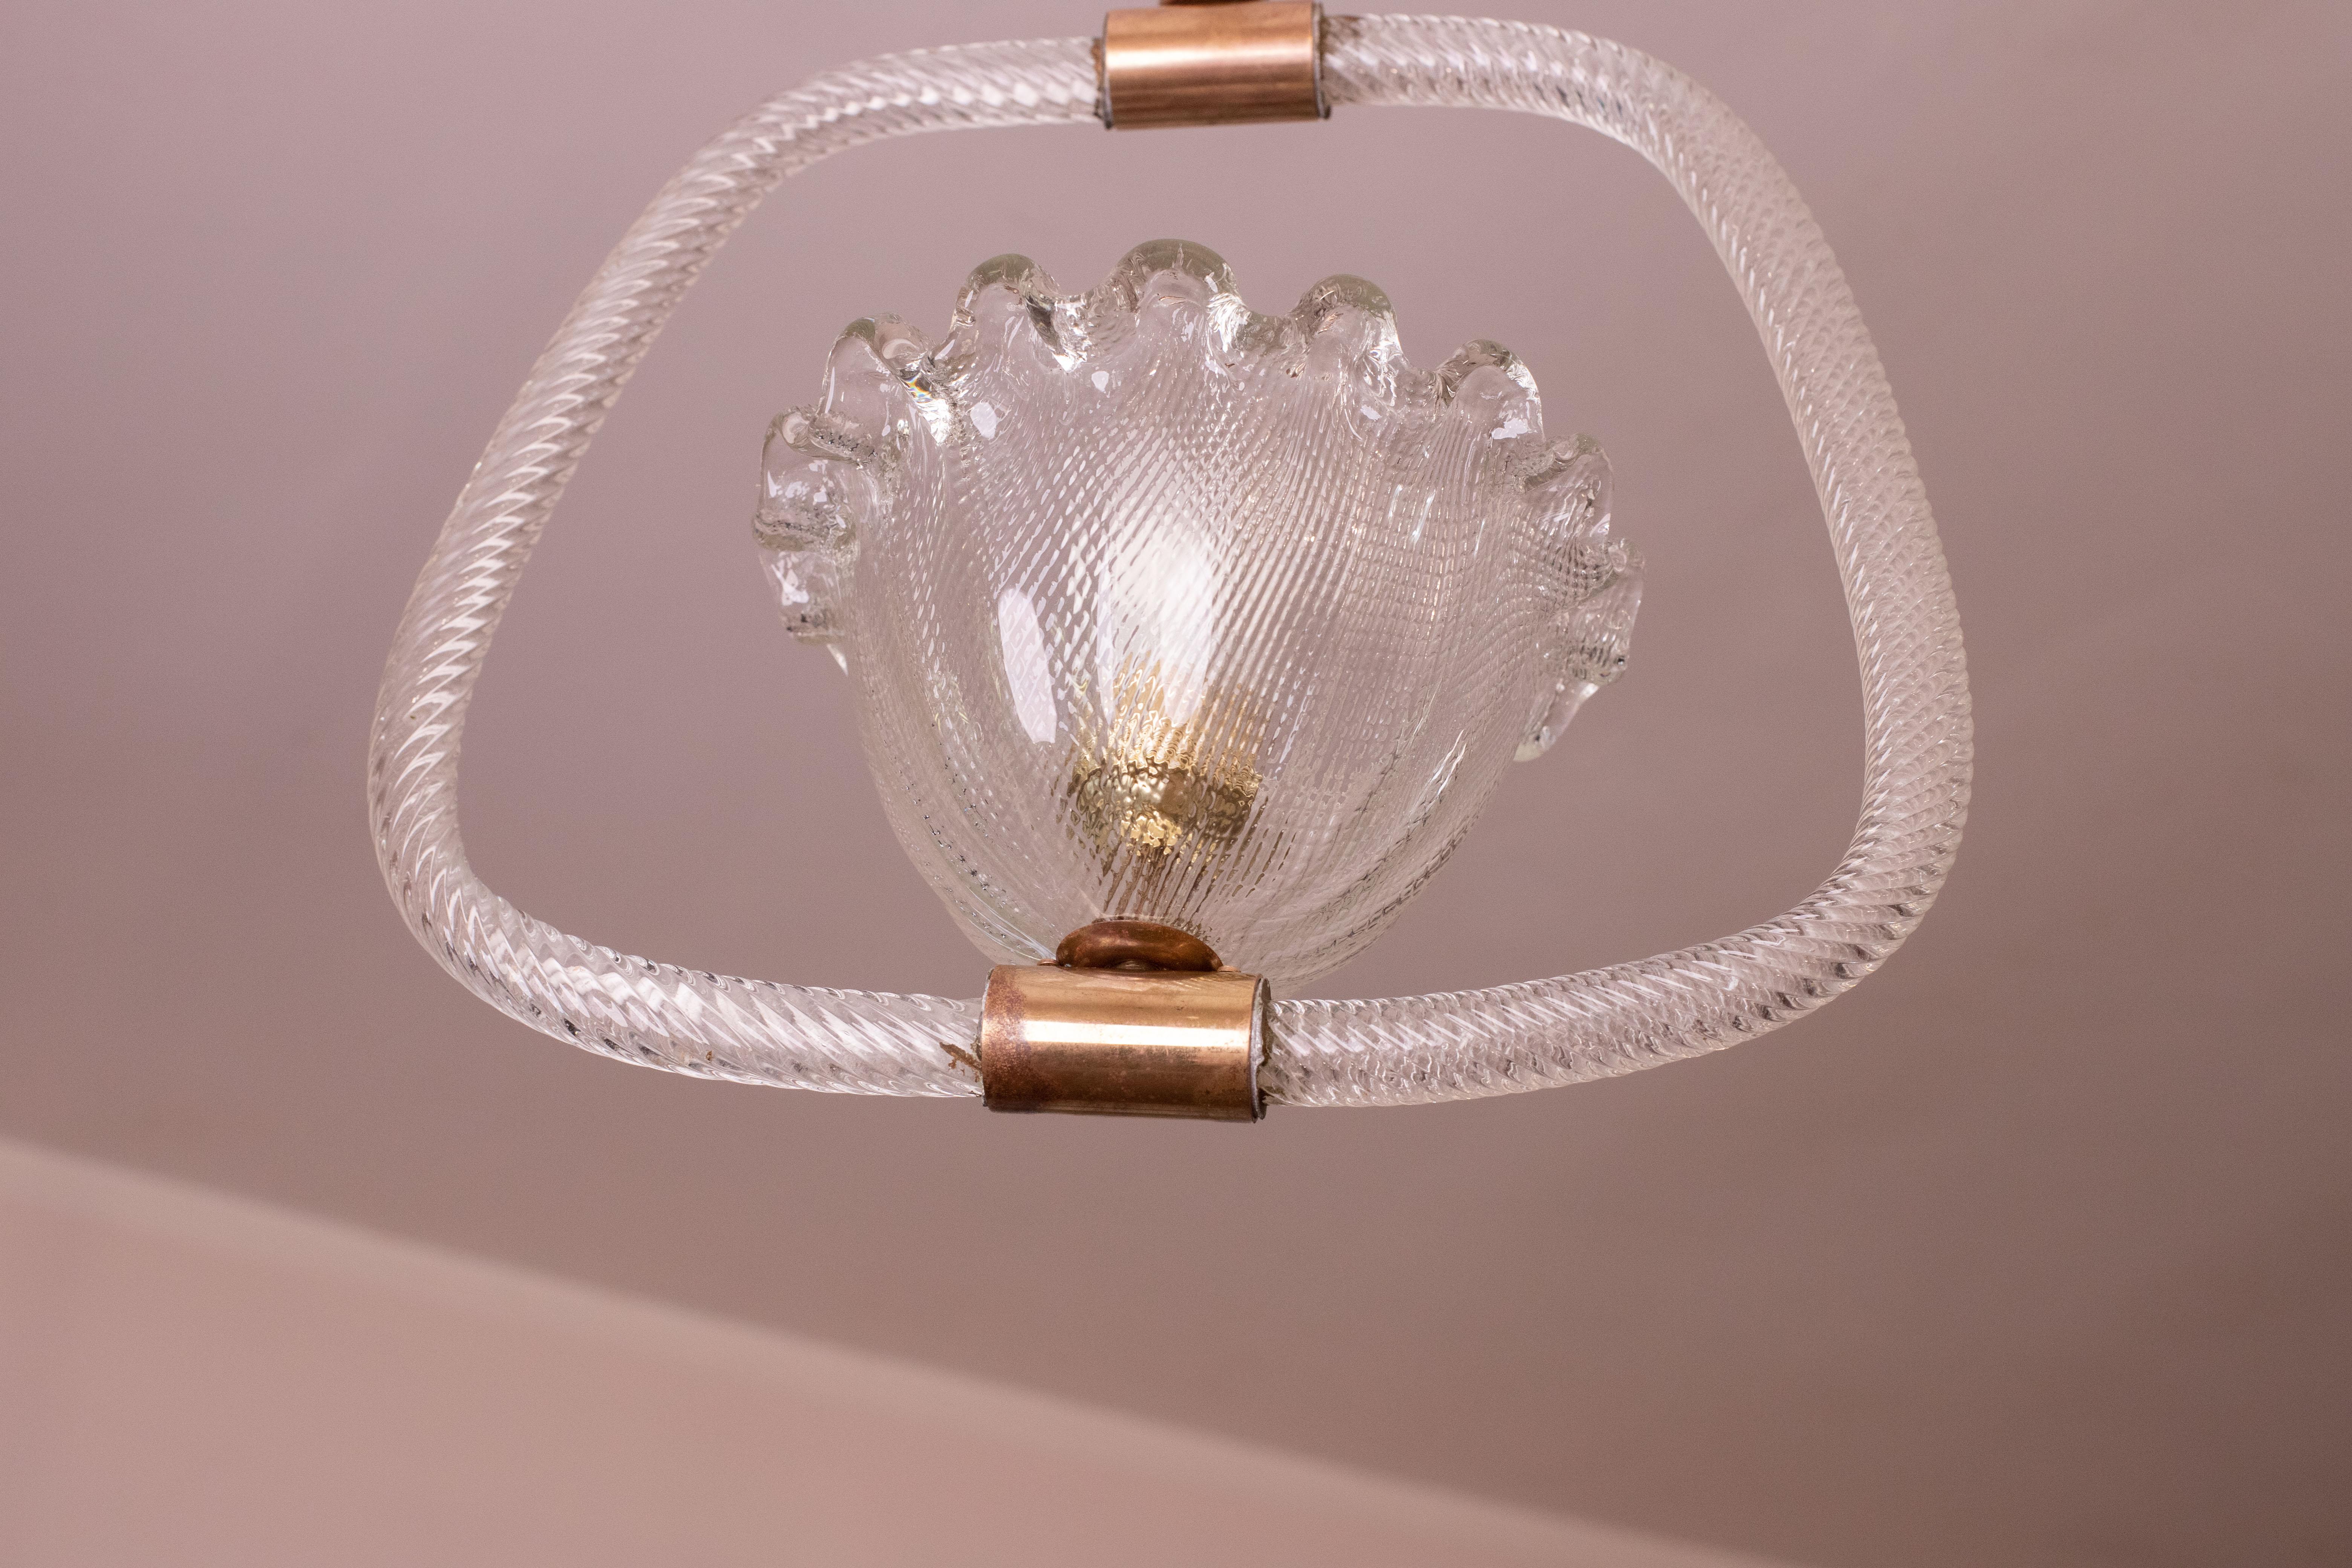 Beautiful Barovier & Toso Pendant Light Chandelier Murano Glass, 1950s For Sale 1